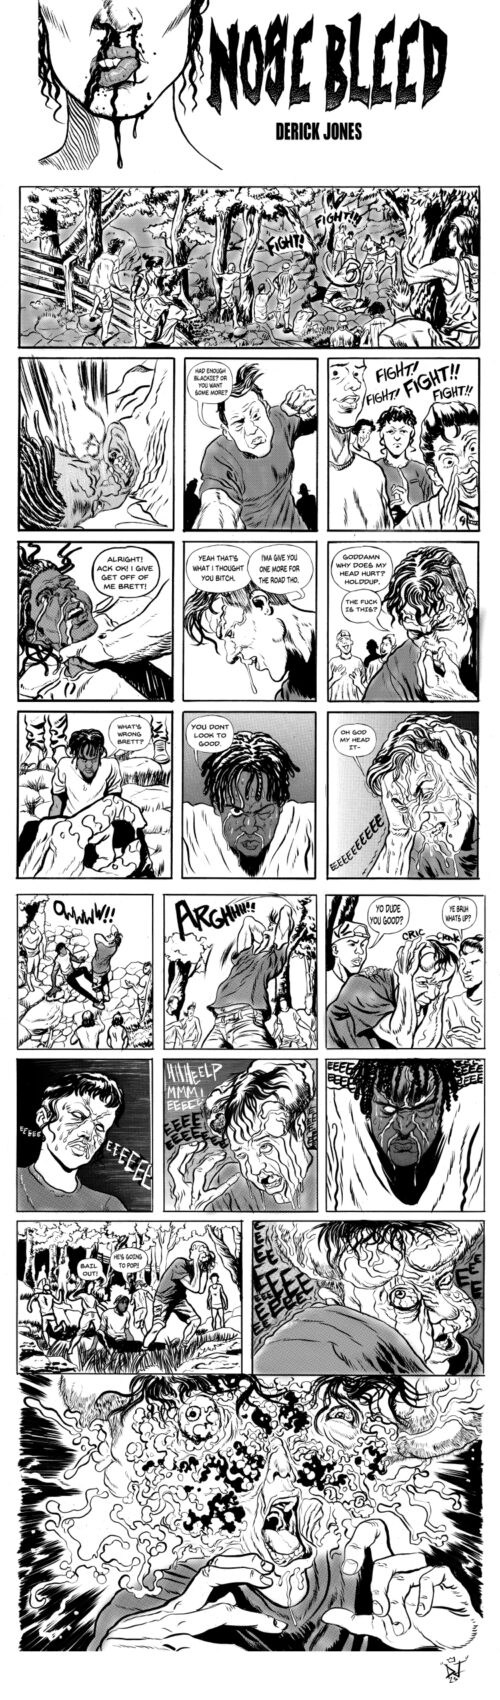 A 19-panel, black-and-white comic with the title “Nose Bleed” at the top tells the story of two people fighting, one black and one white, with a crowd of white people surrounding them and cheering on the white fighter. At the end, the white fighter has a terrible breakdown, his head seems to explode and he looks like a monster.